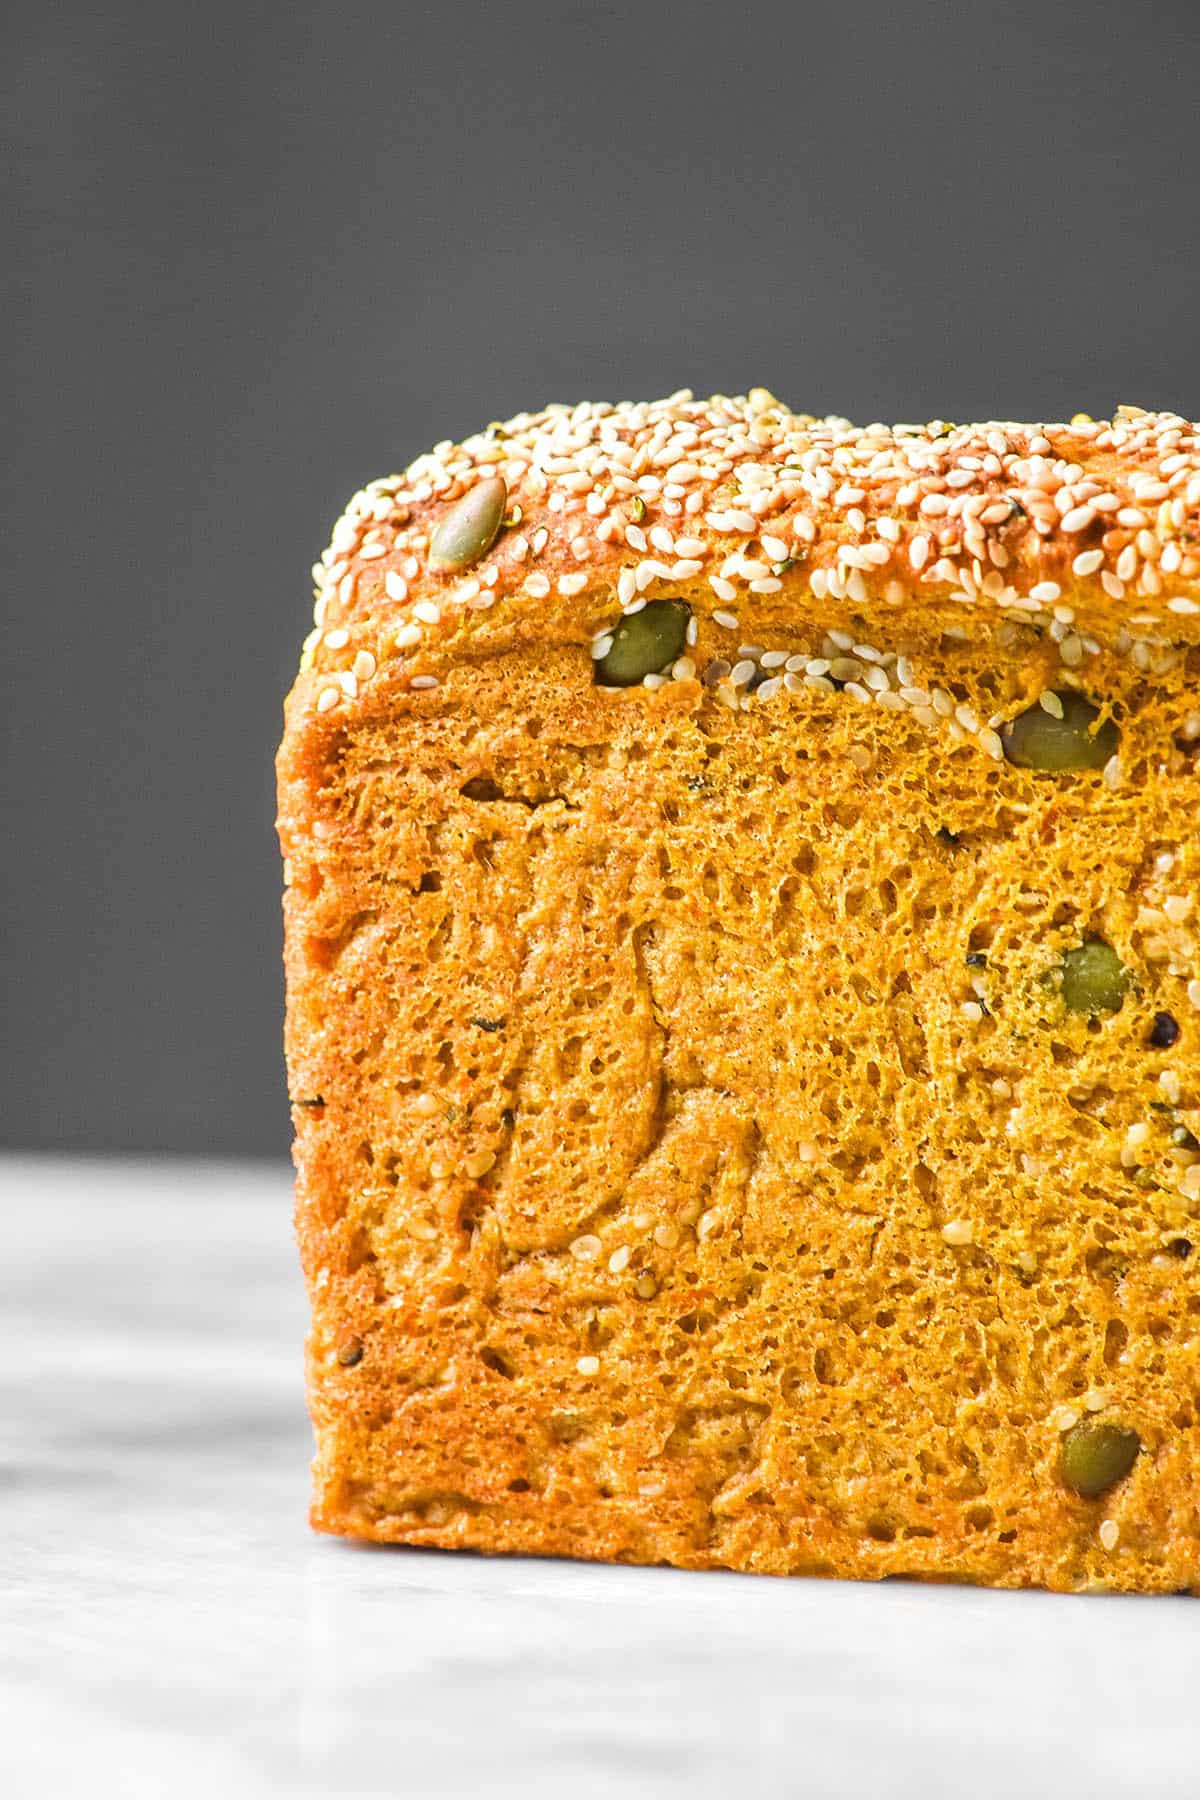 A brightly lit side on image of a gluten free savoury pumpkin loaf that has been topped with nuts and seeds. It sits on a white marble table against a light backdrop.